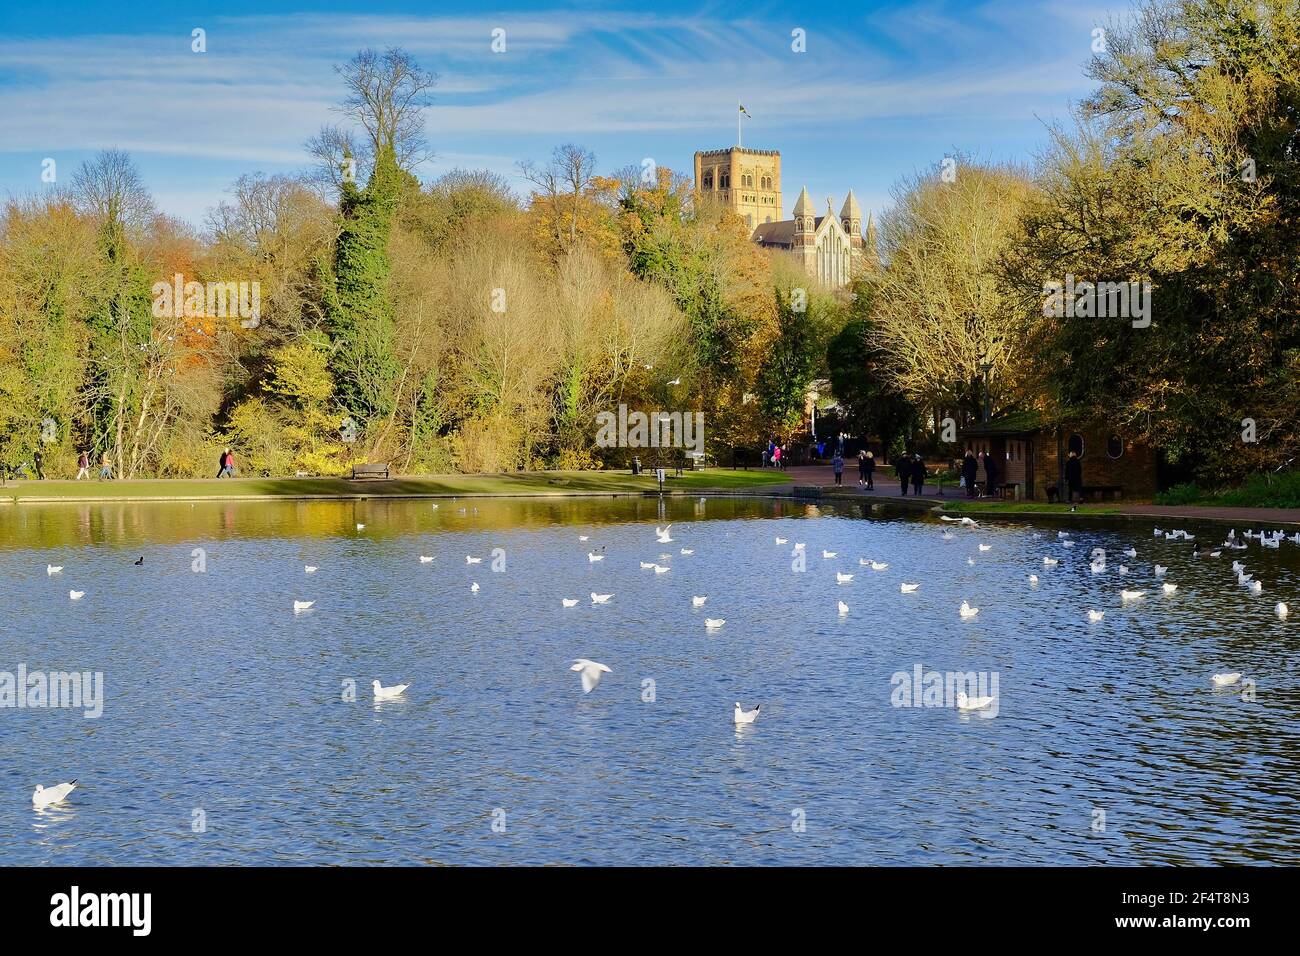 ST. ALBANS, UNITED KINGDOM - Nov 19, 2017: View of the ornamental lake in Verulanium Park, St Albans,UK. with the Cathedral in the background. Stock Photo